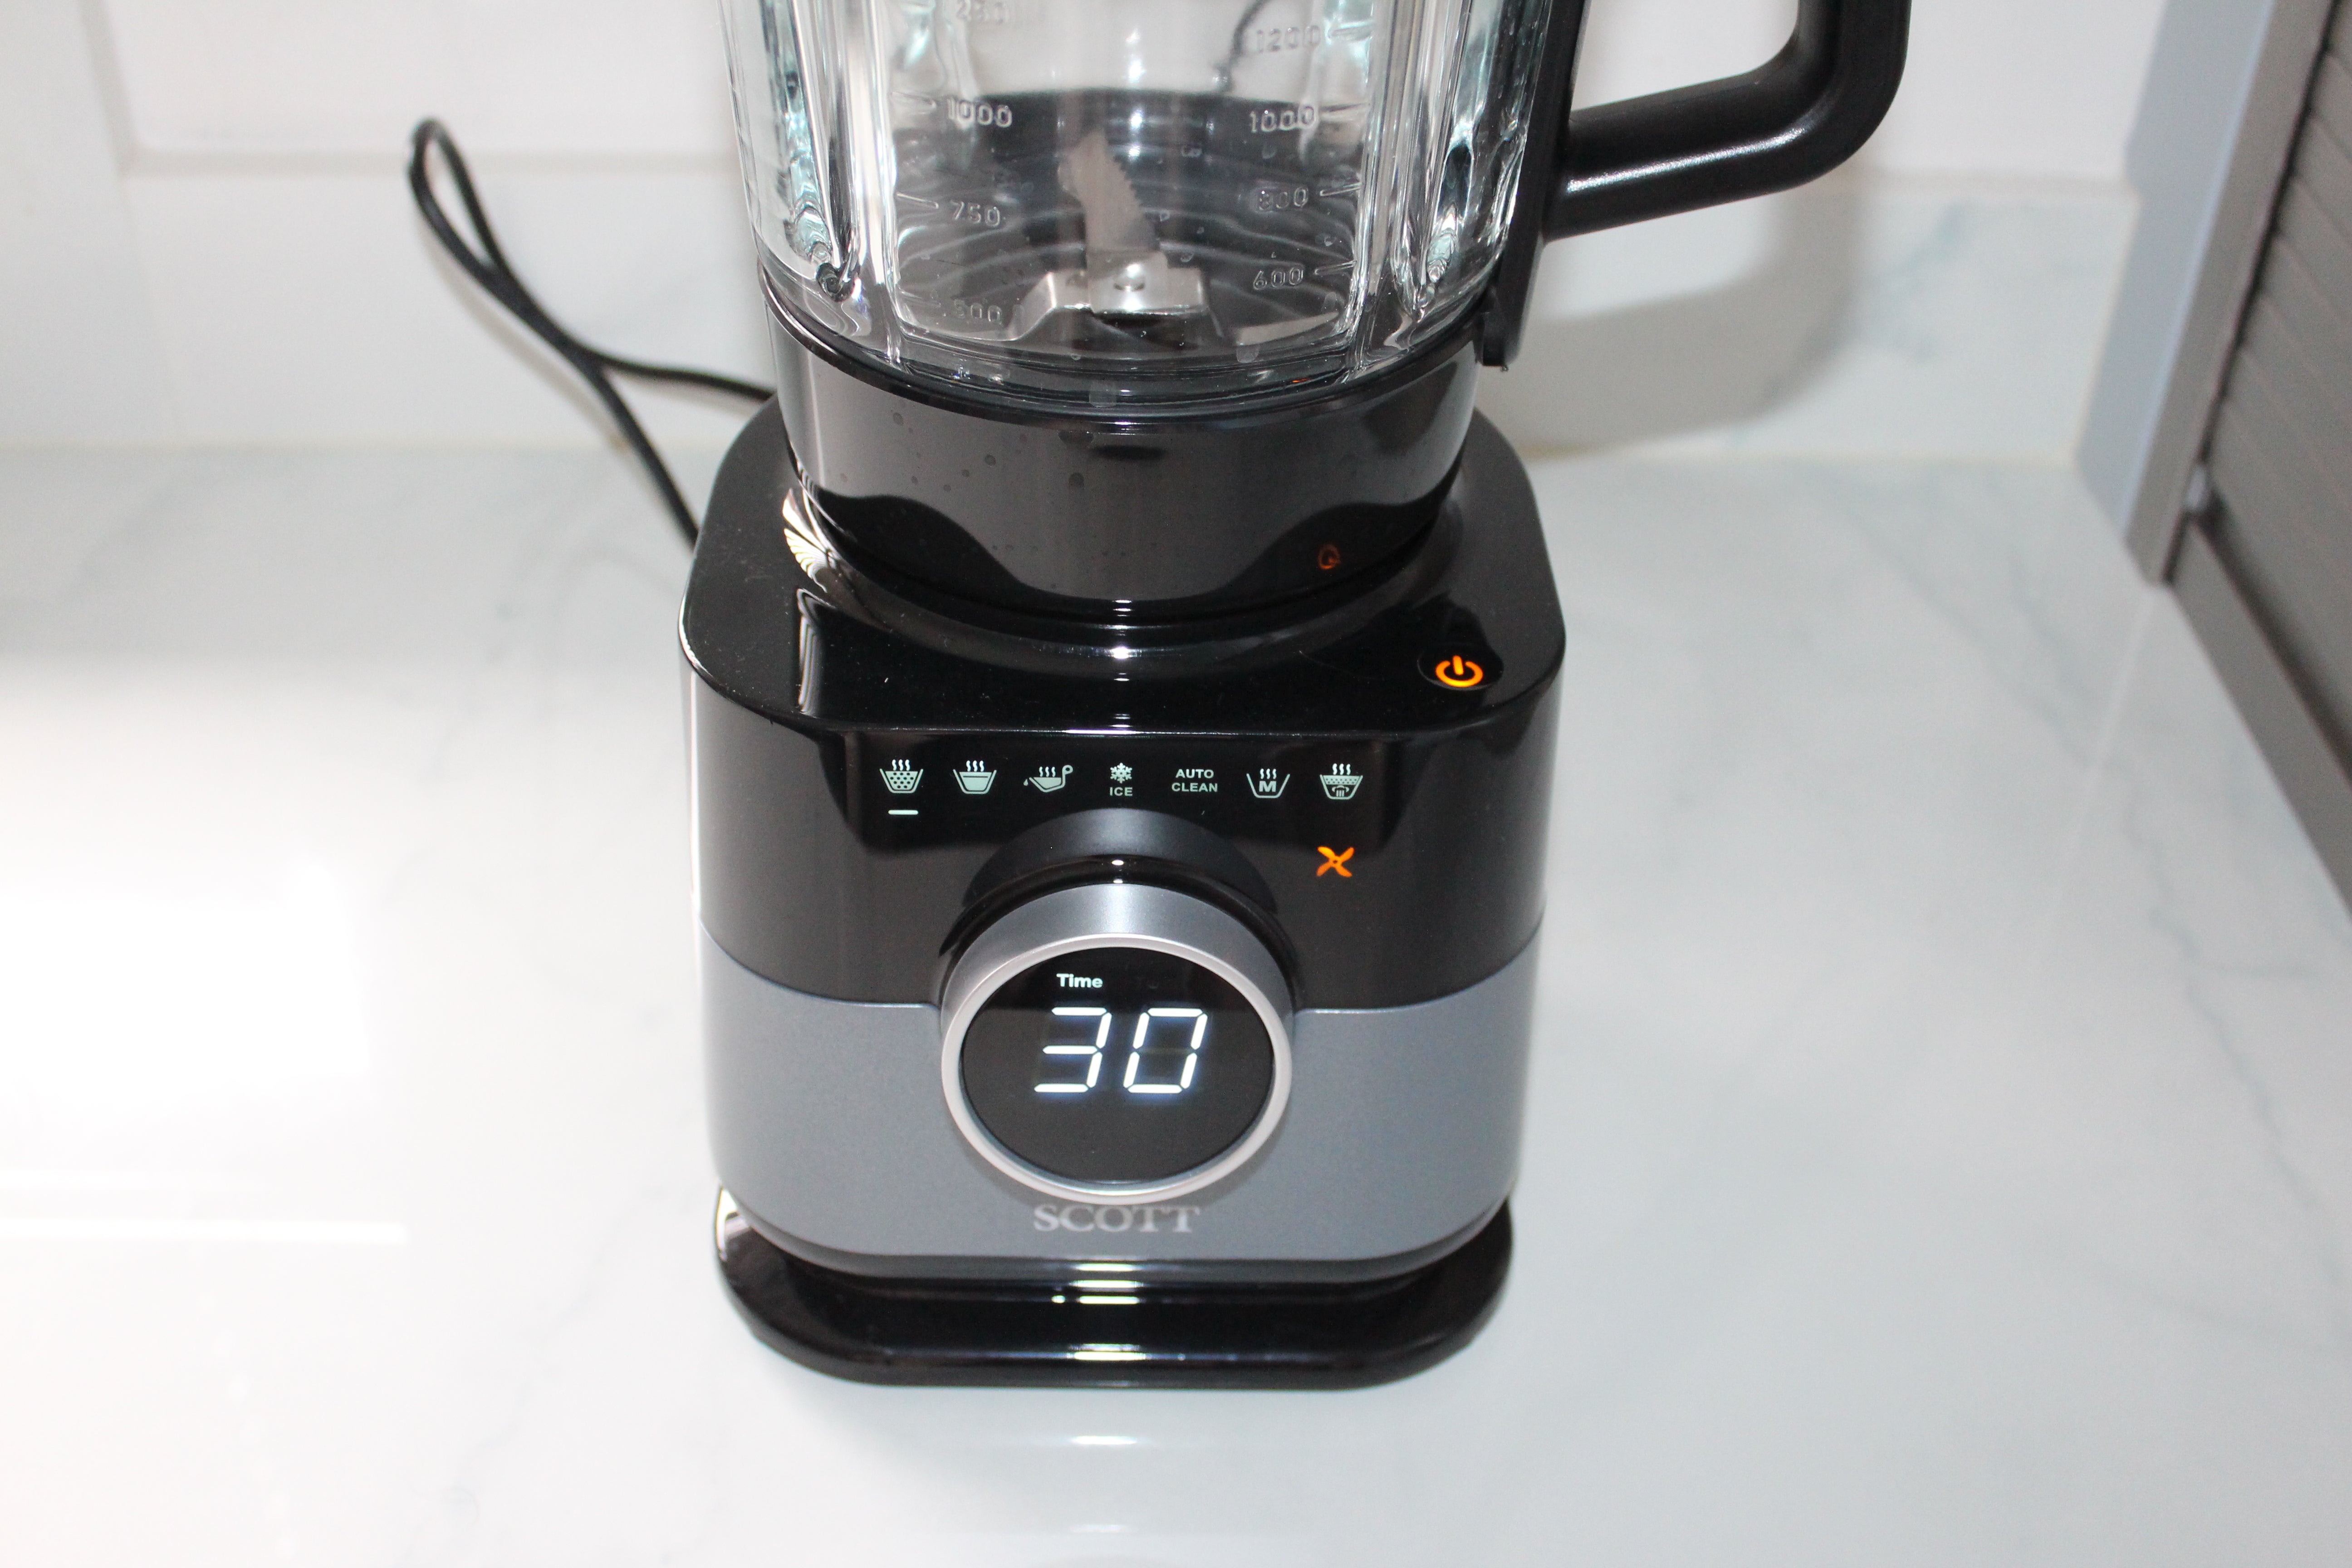 Scott Simplissimo Chef blender on kitchen counter with digital timer display.